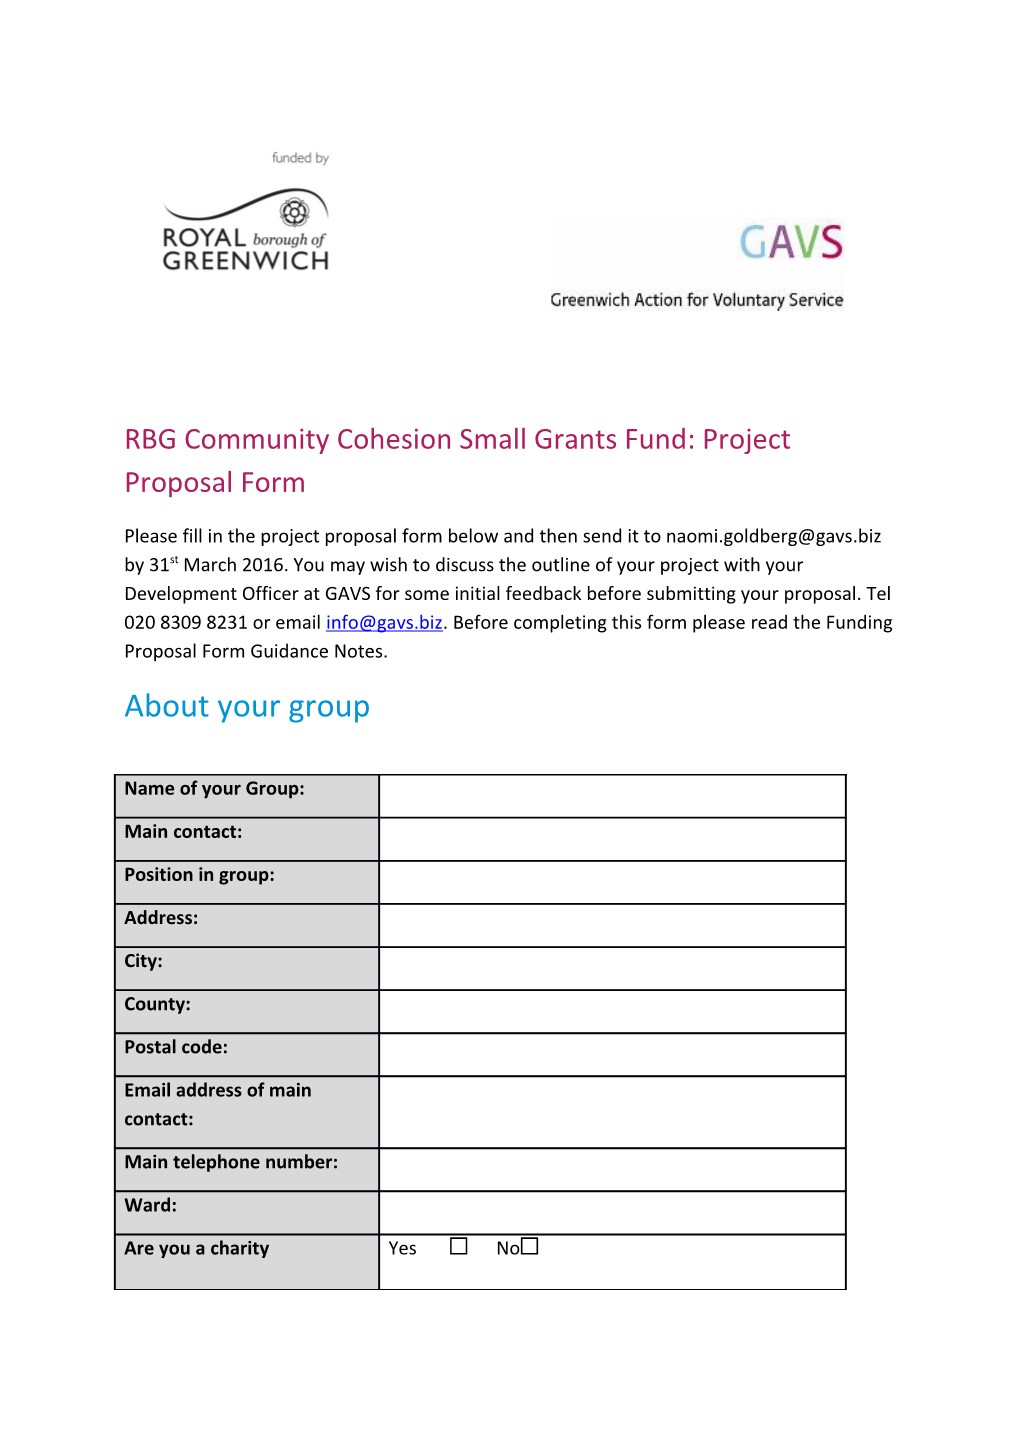 RBG Community Cohesion Small Grants Fund: Project Proposal Form